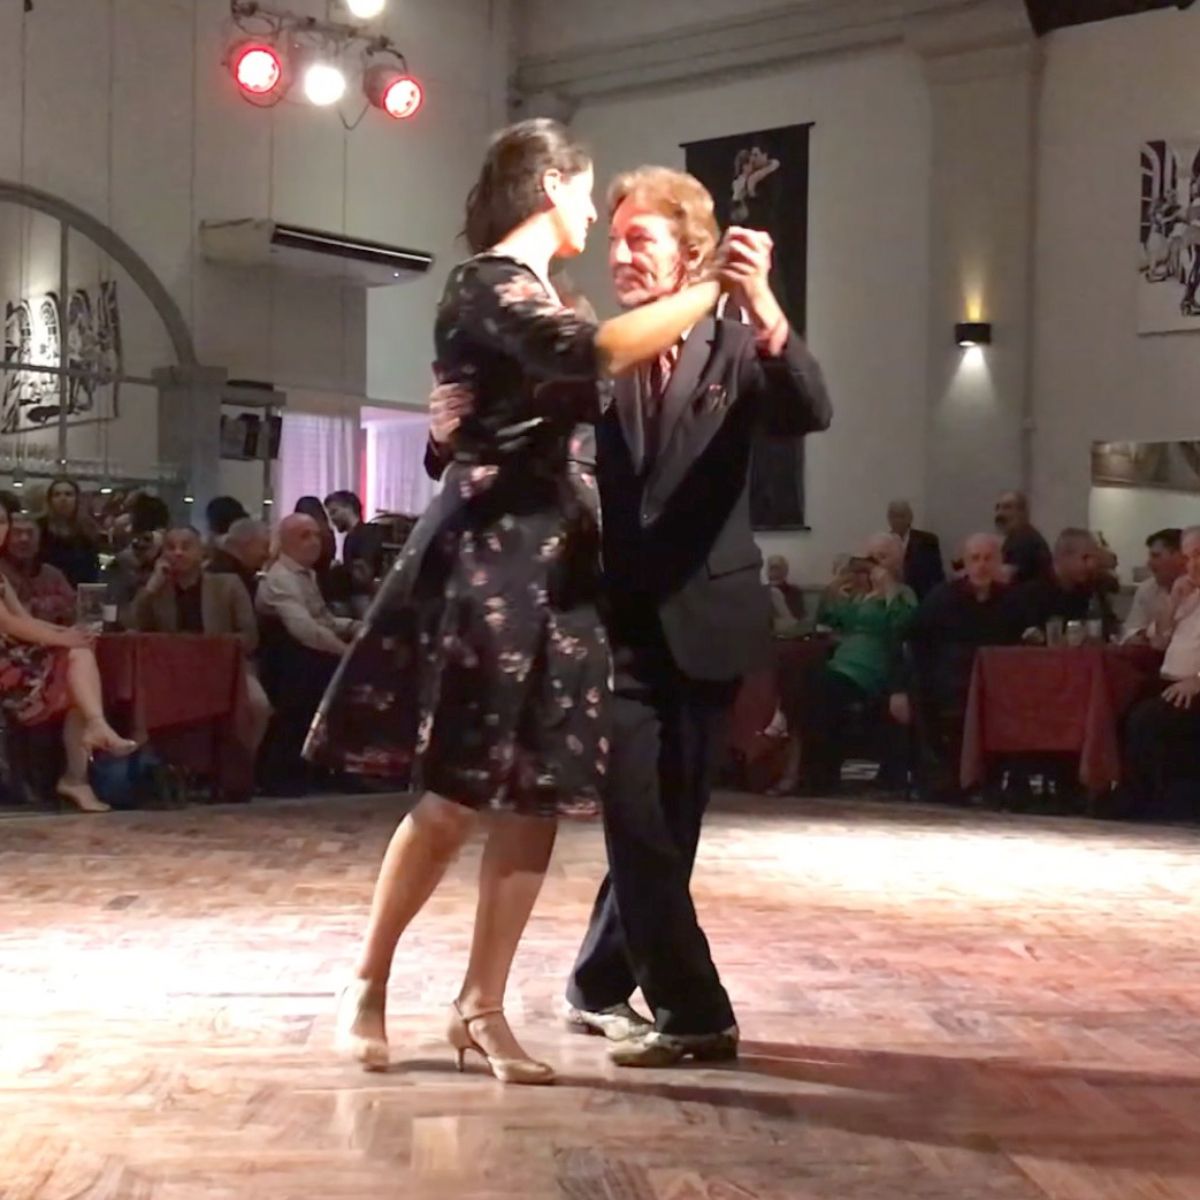 Argentine Tango dancing by Marcelo Solis and Mimi at Milonga Parakultural, Salón Canning, Buenos Aires, October 2022.